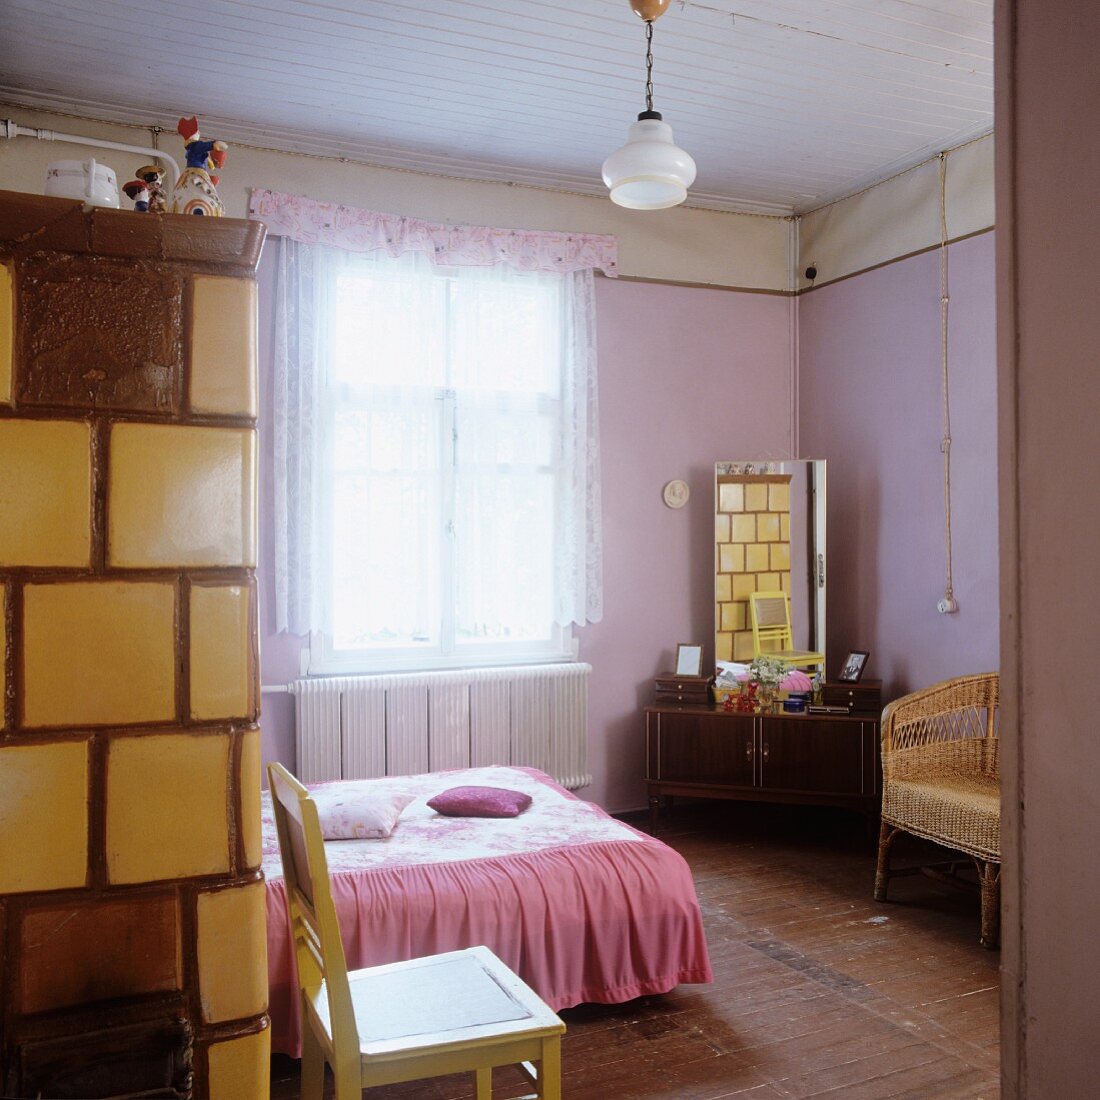 Double bed with pink counterpane opposite dressing table with tall mirror in pink-painted bedroom